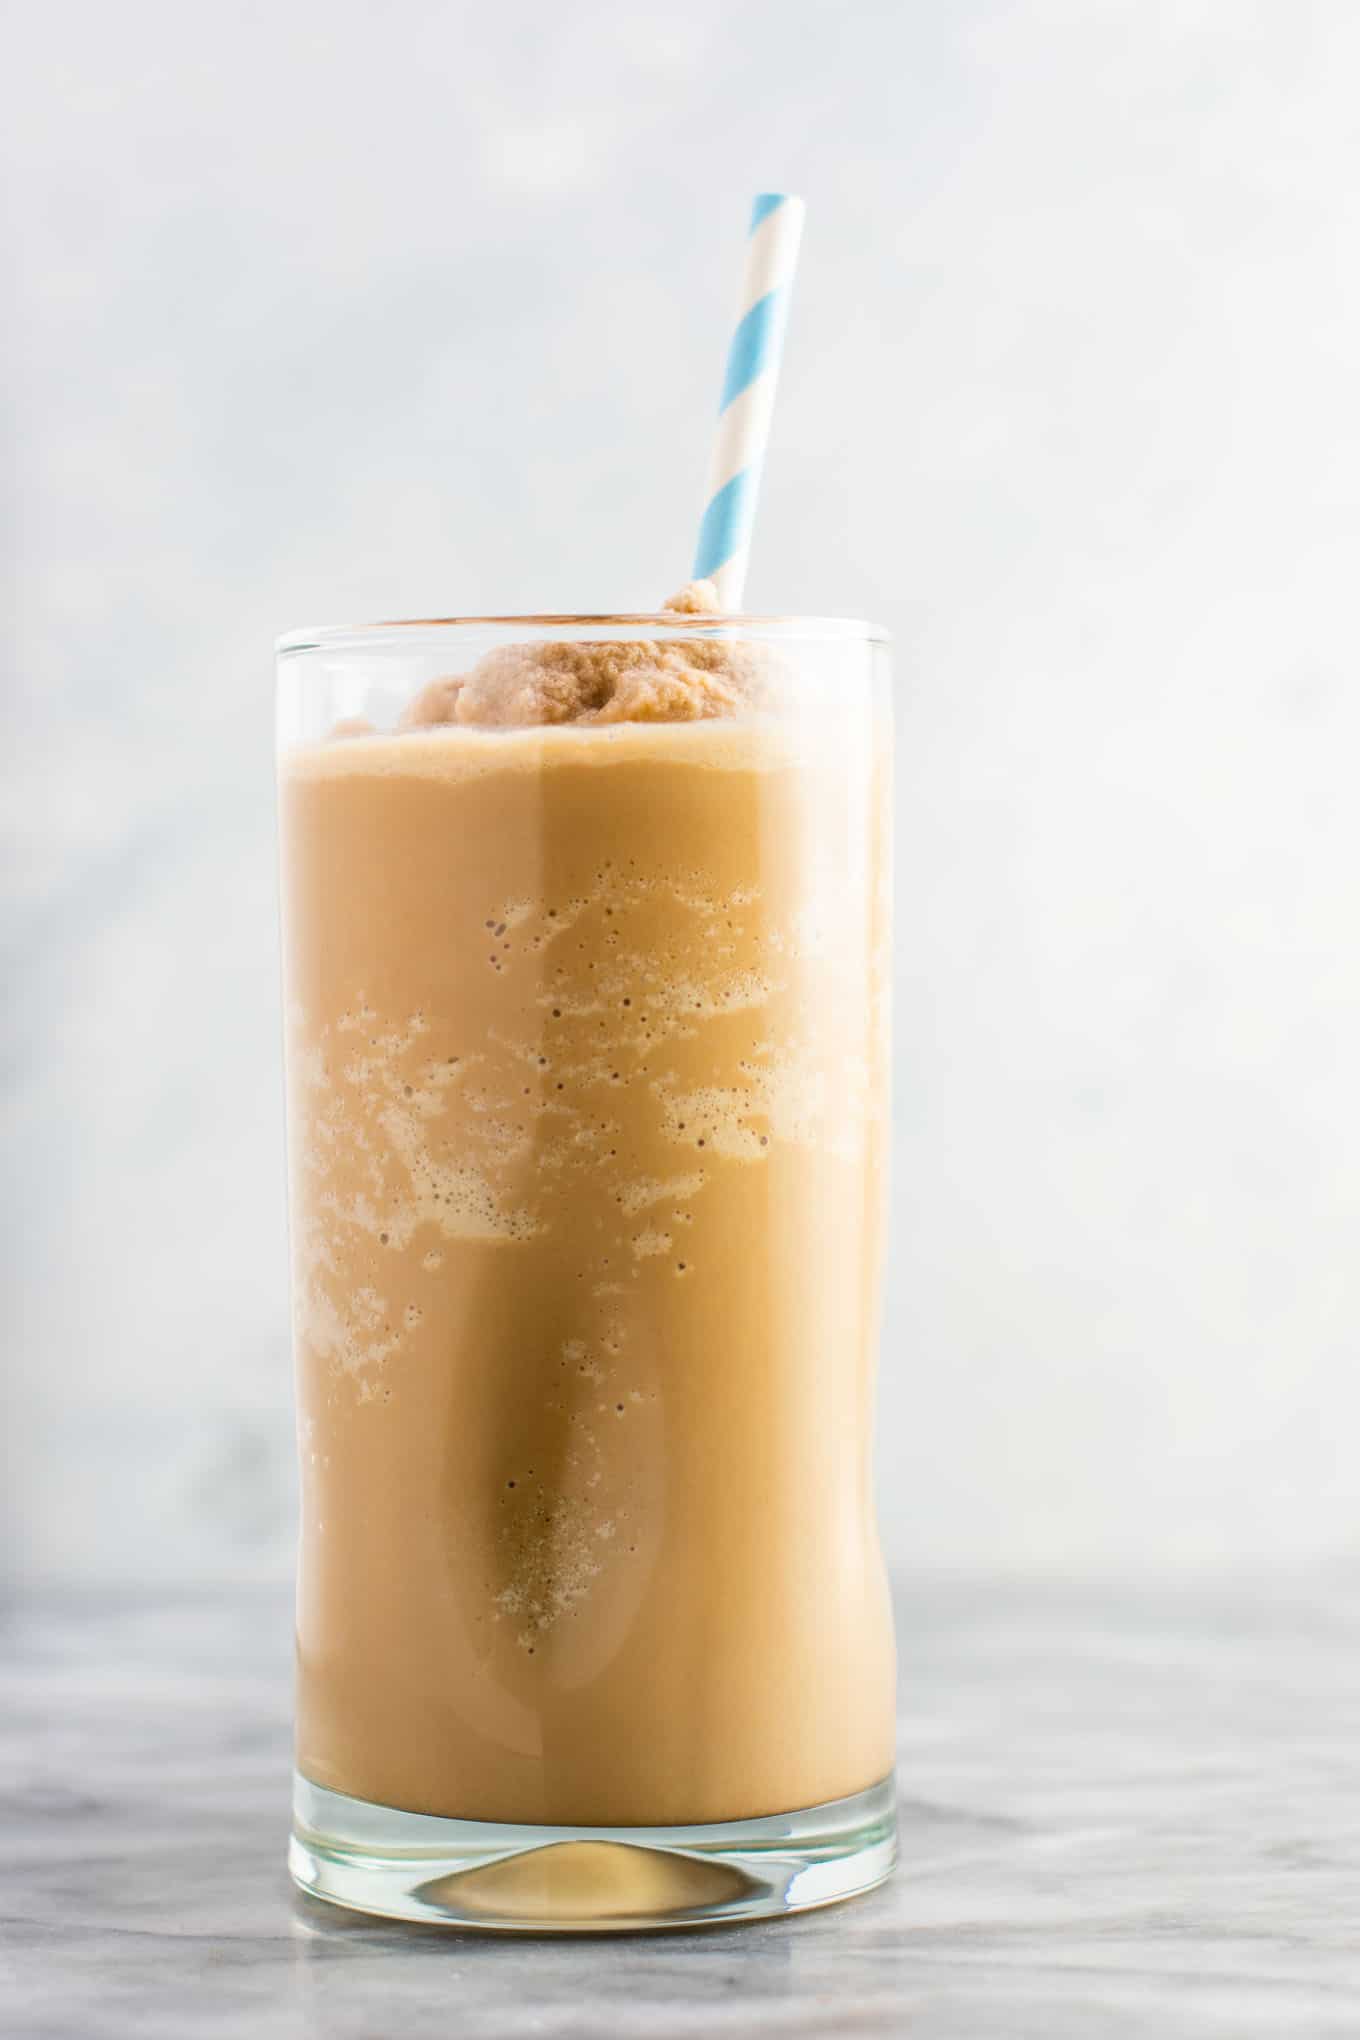 Easy frozen coffee recipe. Make this at home instead of spending $5 at starbucks! So easy and tastes like a treat! #frozencoffee #coffeerecipe #coffee #icedcoffee